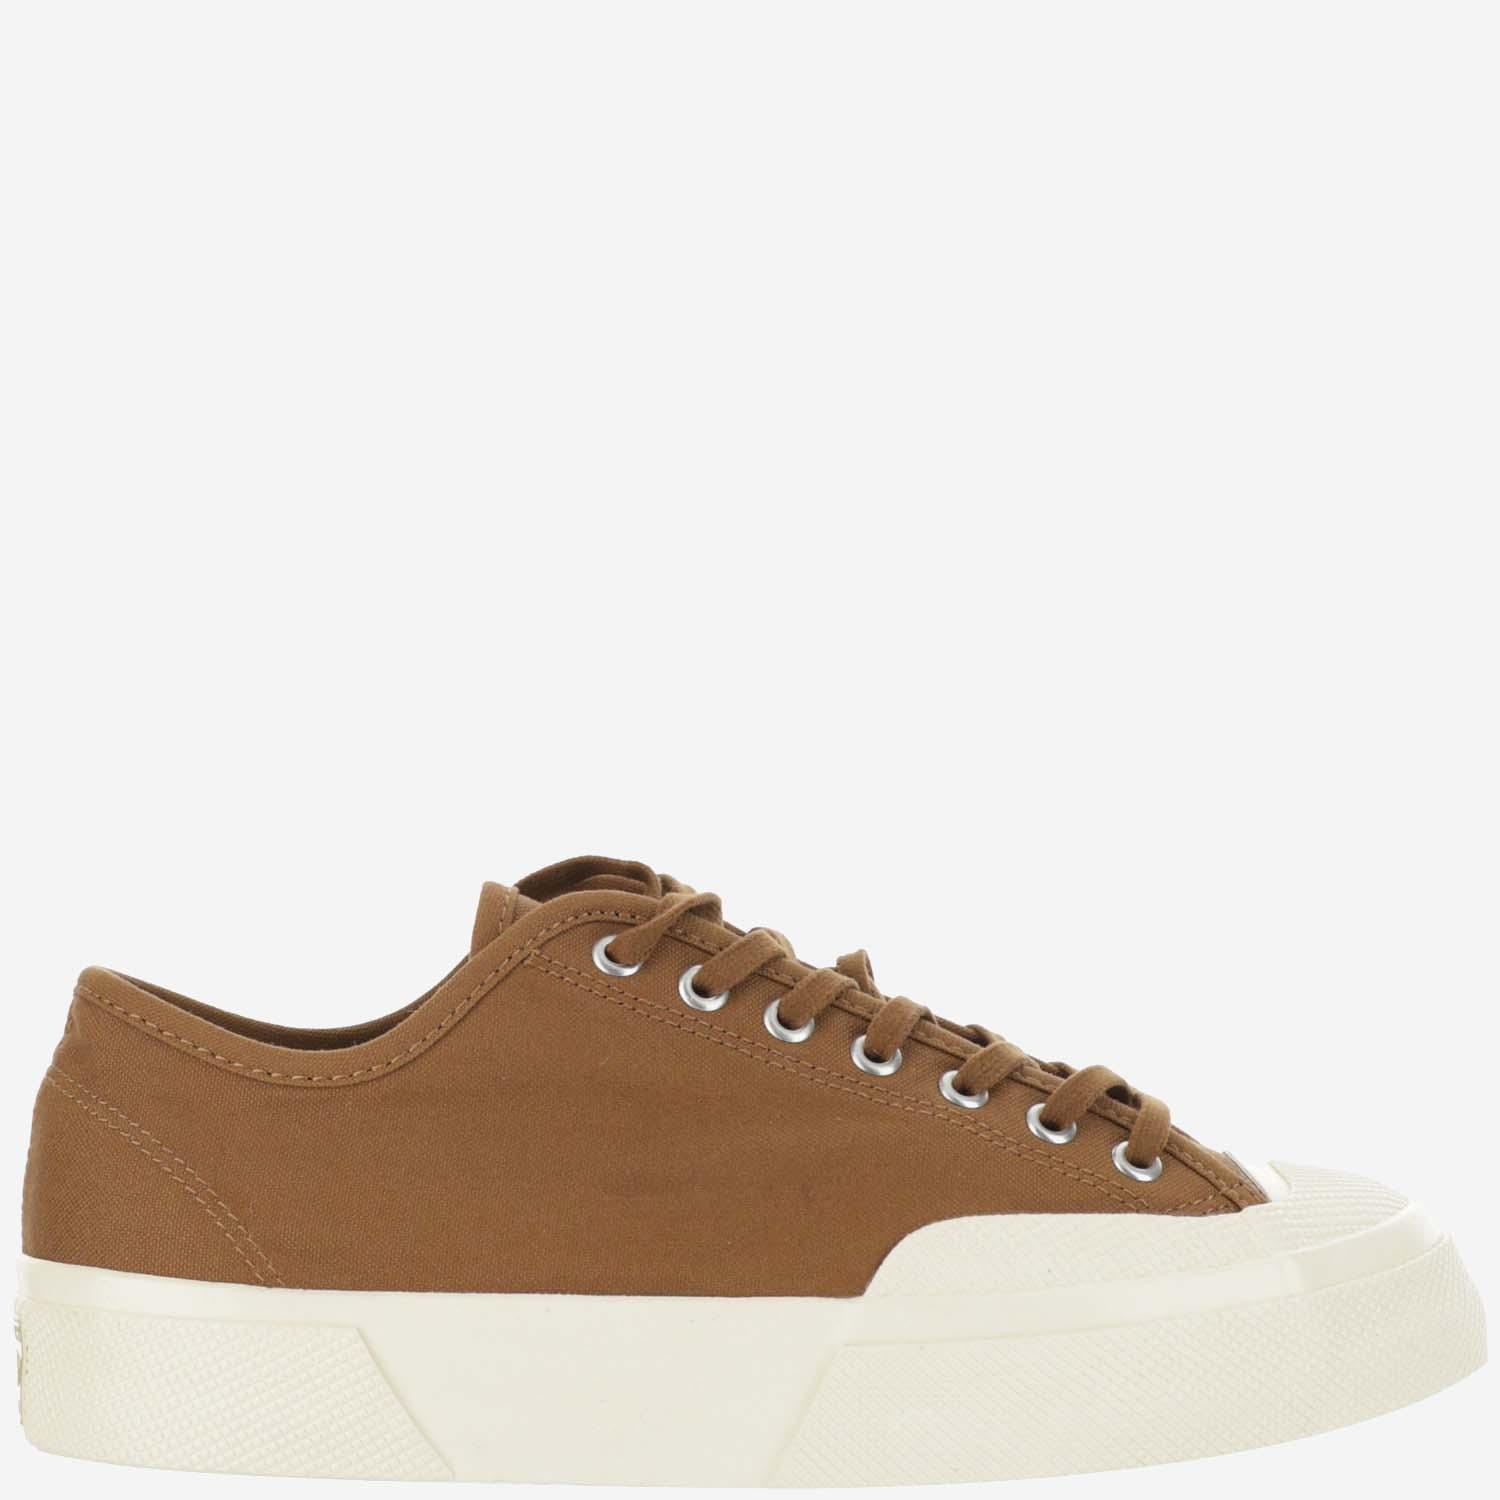 Superga Cotton Canvas Sneakers in Brown | Lyst